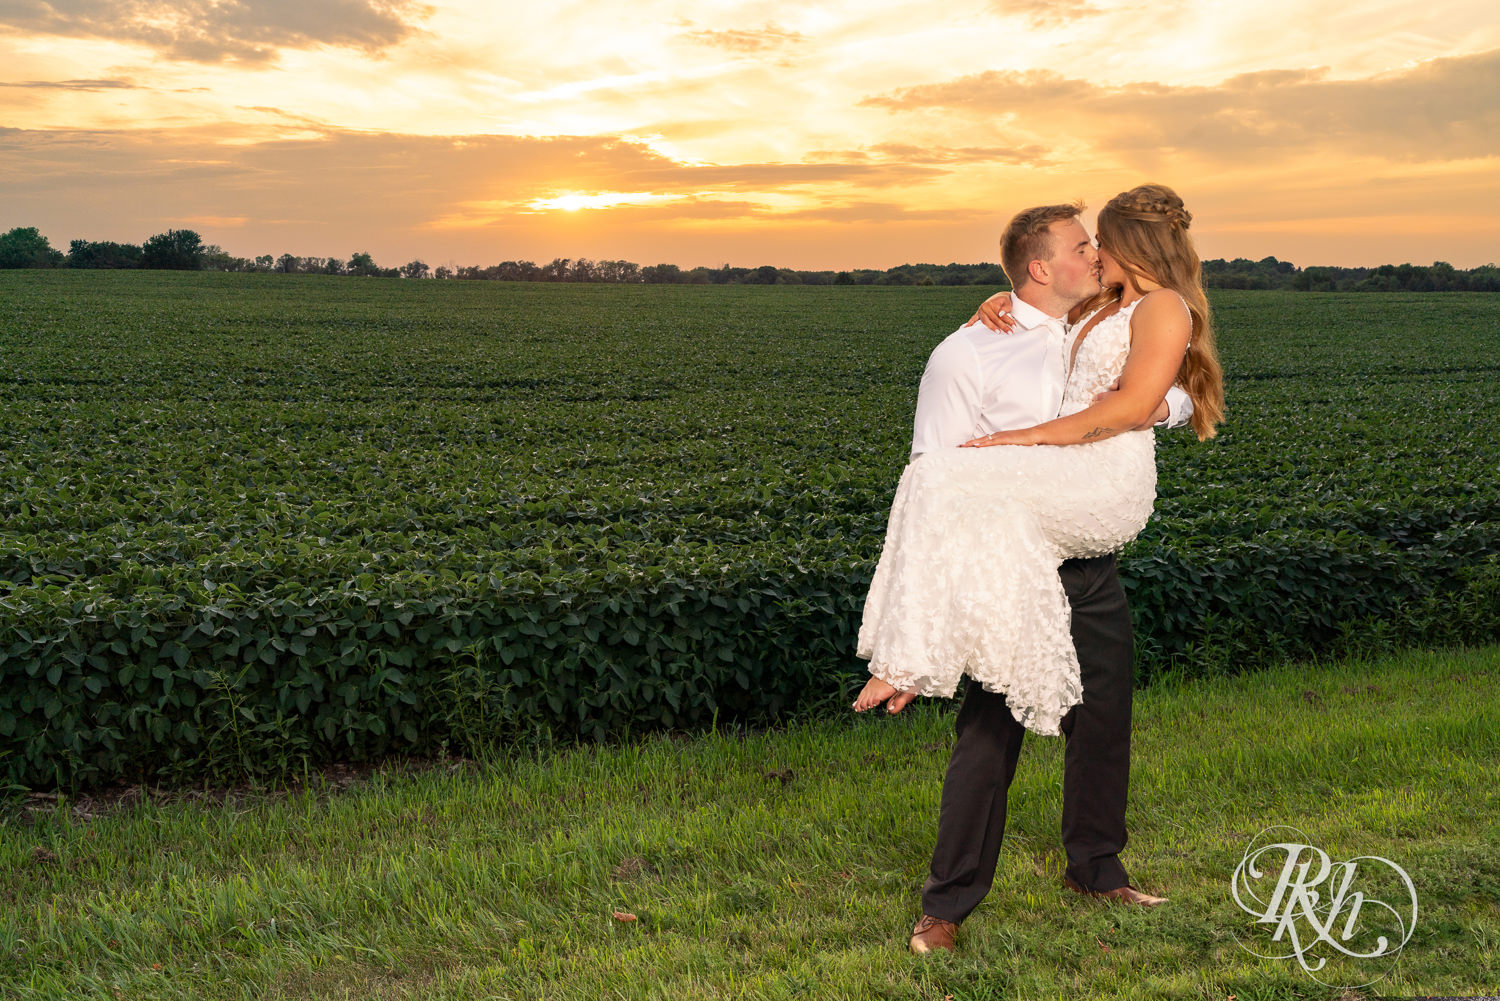 Groom lifts bride and they kiss during sunset at Ahavah Cottage in Elysian, Minnesota.